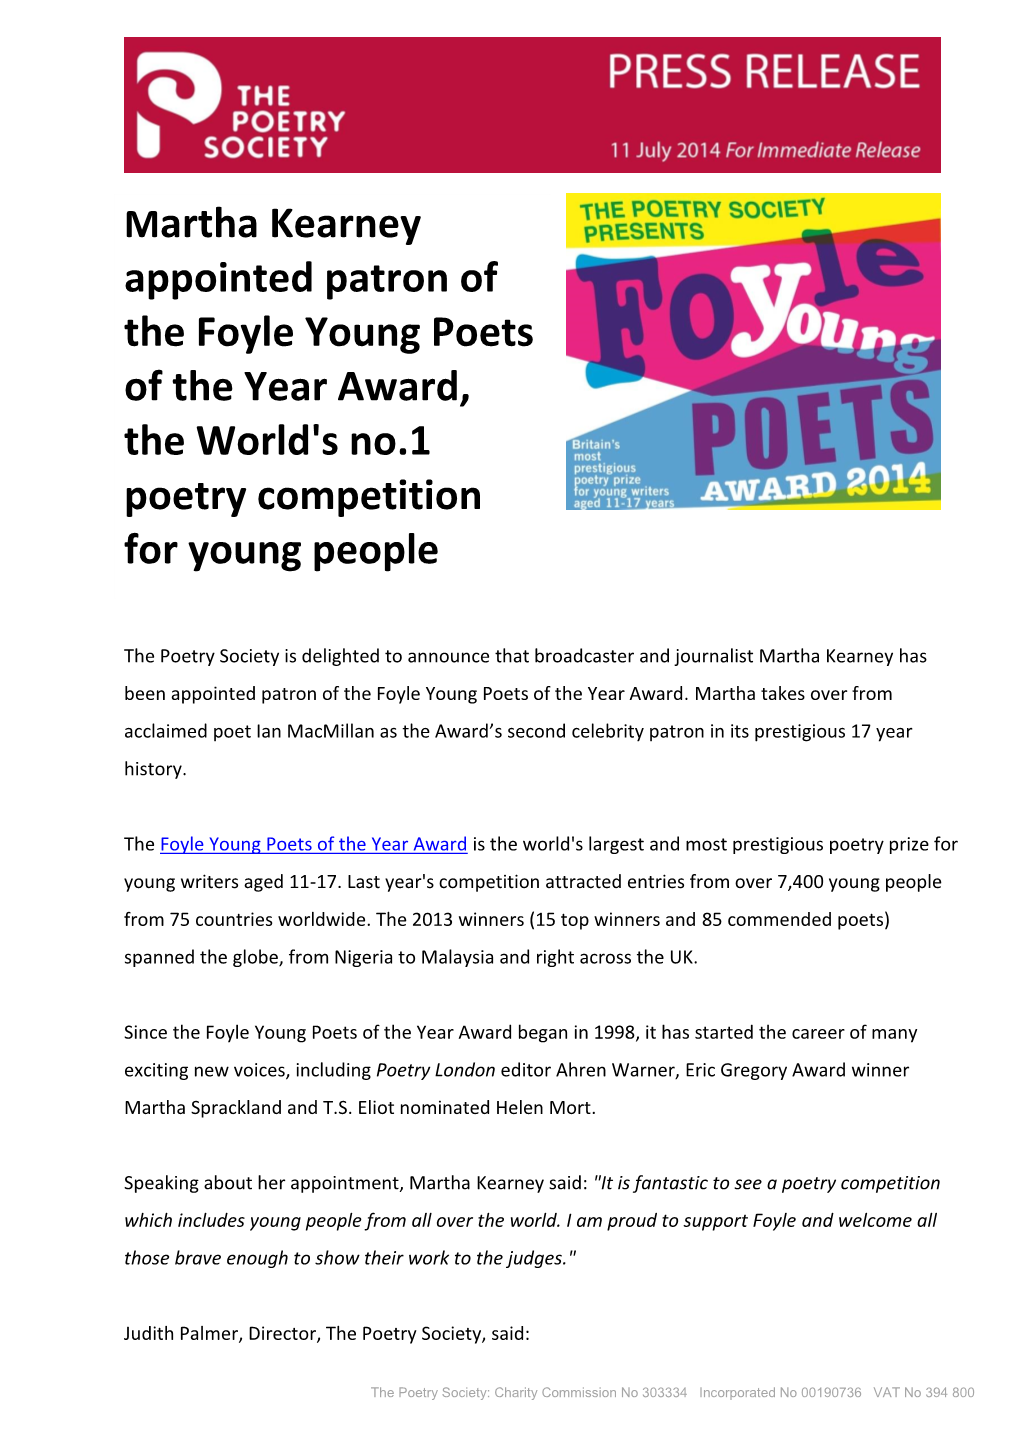 Radio 4'S Martha Kearney Announced As Patron of the Foyle Young Poets